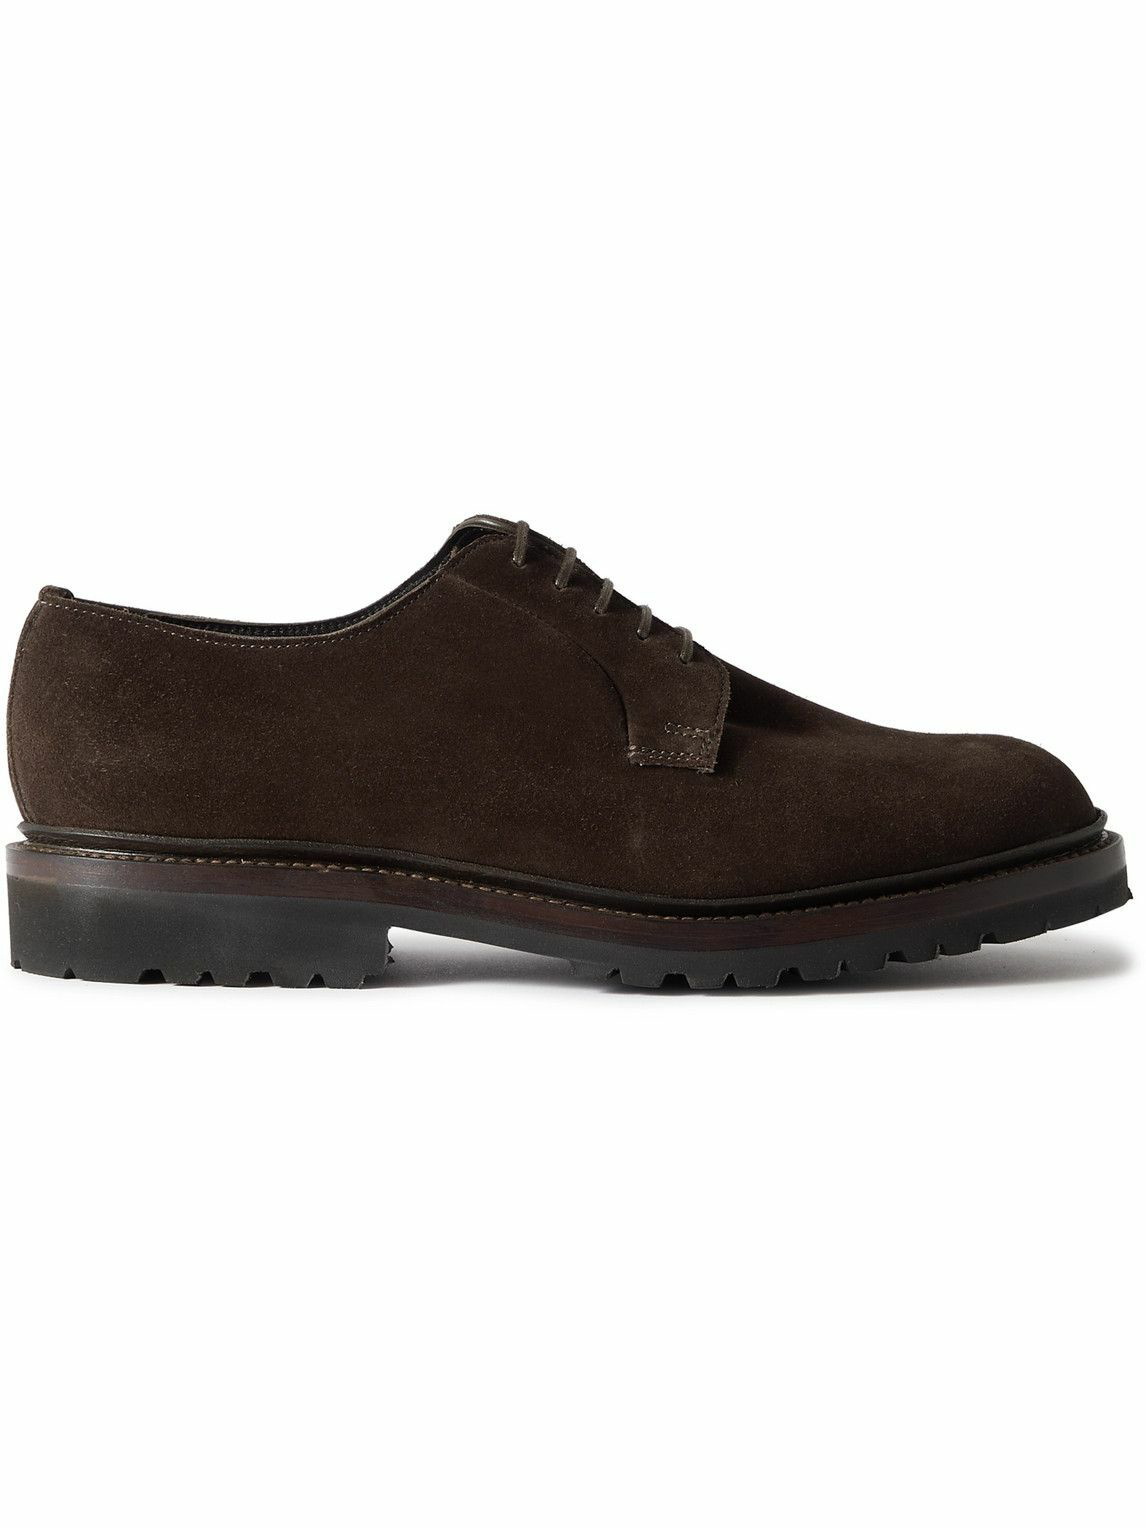 George Cleverley - Archie Suede Derby Shoes - Brown George Cleverley